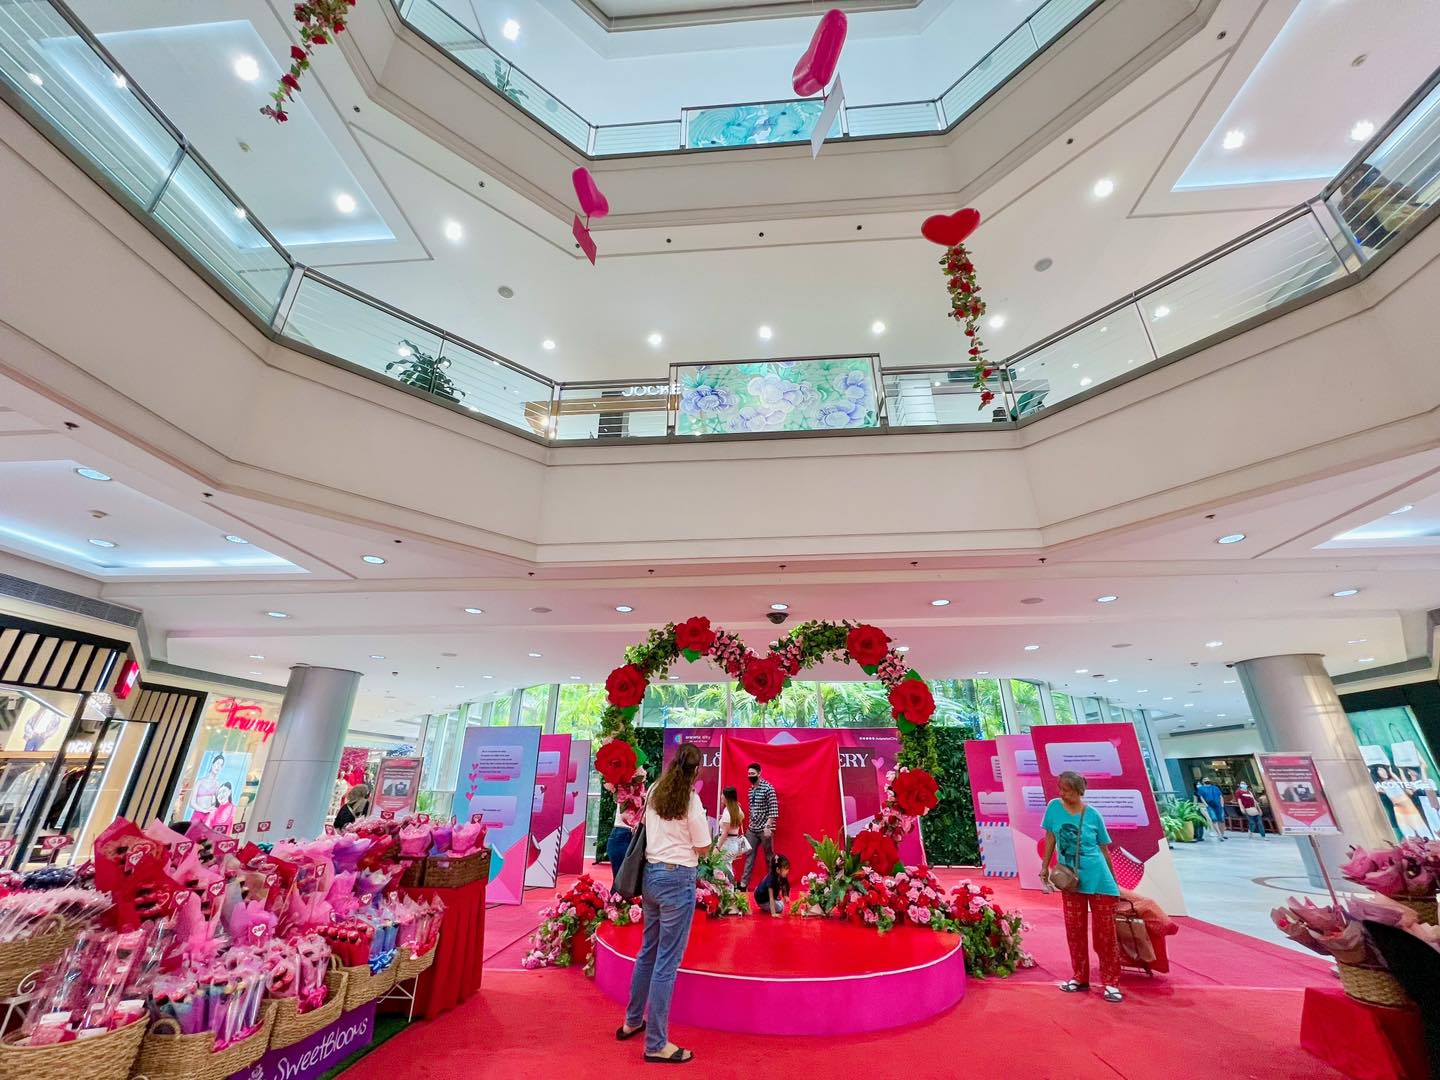 Try these “hidden” gems in Araneta City for your V-Day date